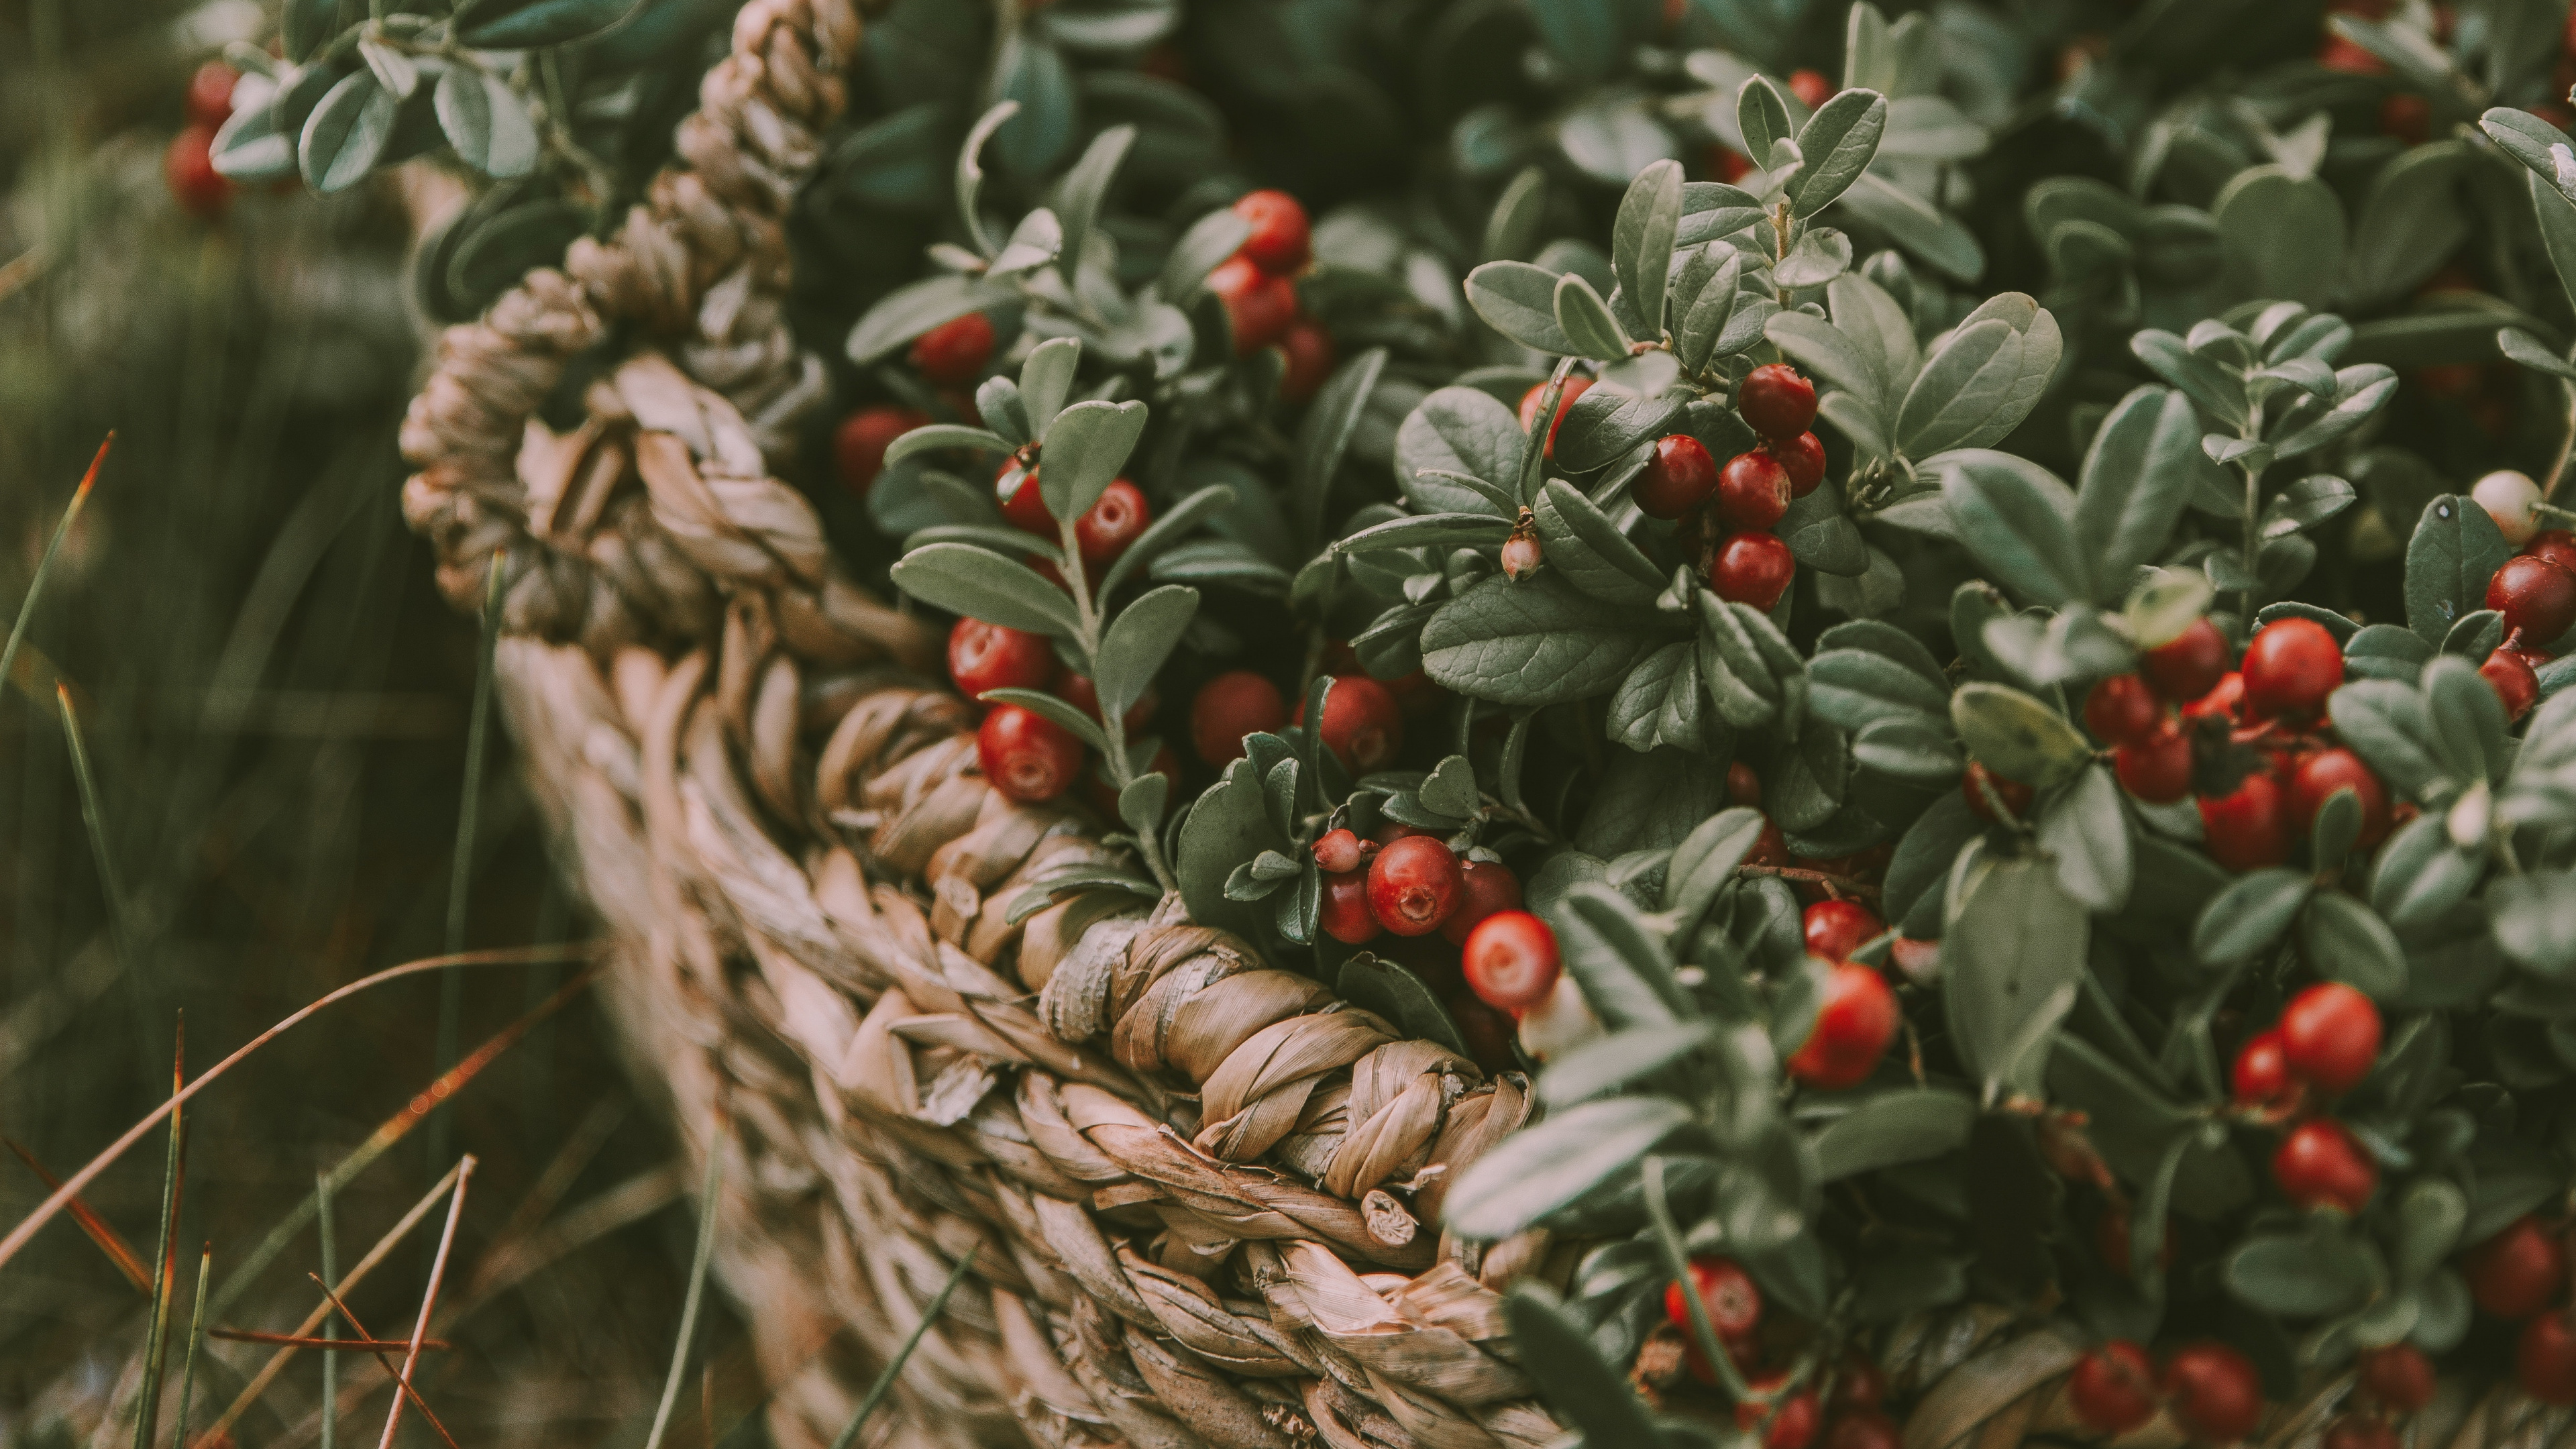 Red and Green Round Fruits in Brown Woven Basket. Wallpaper in 3840x2160 Resolution